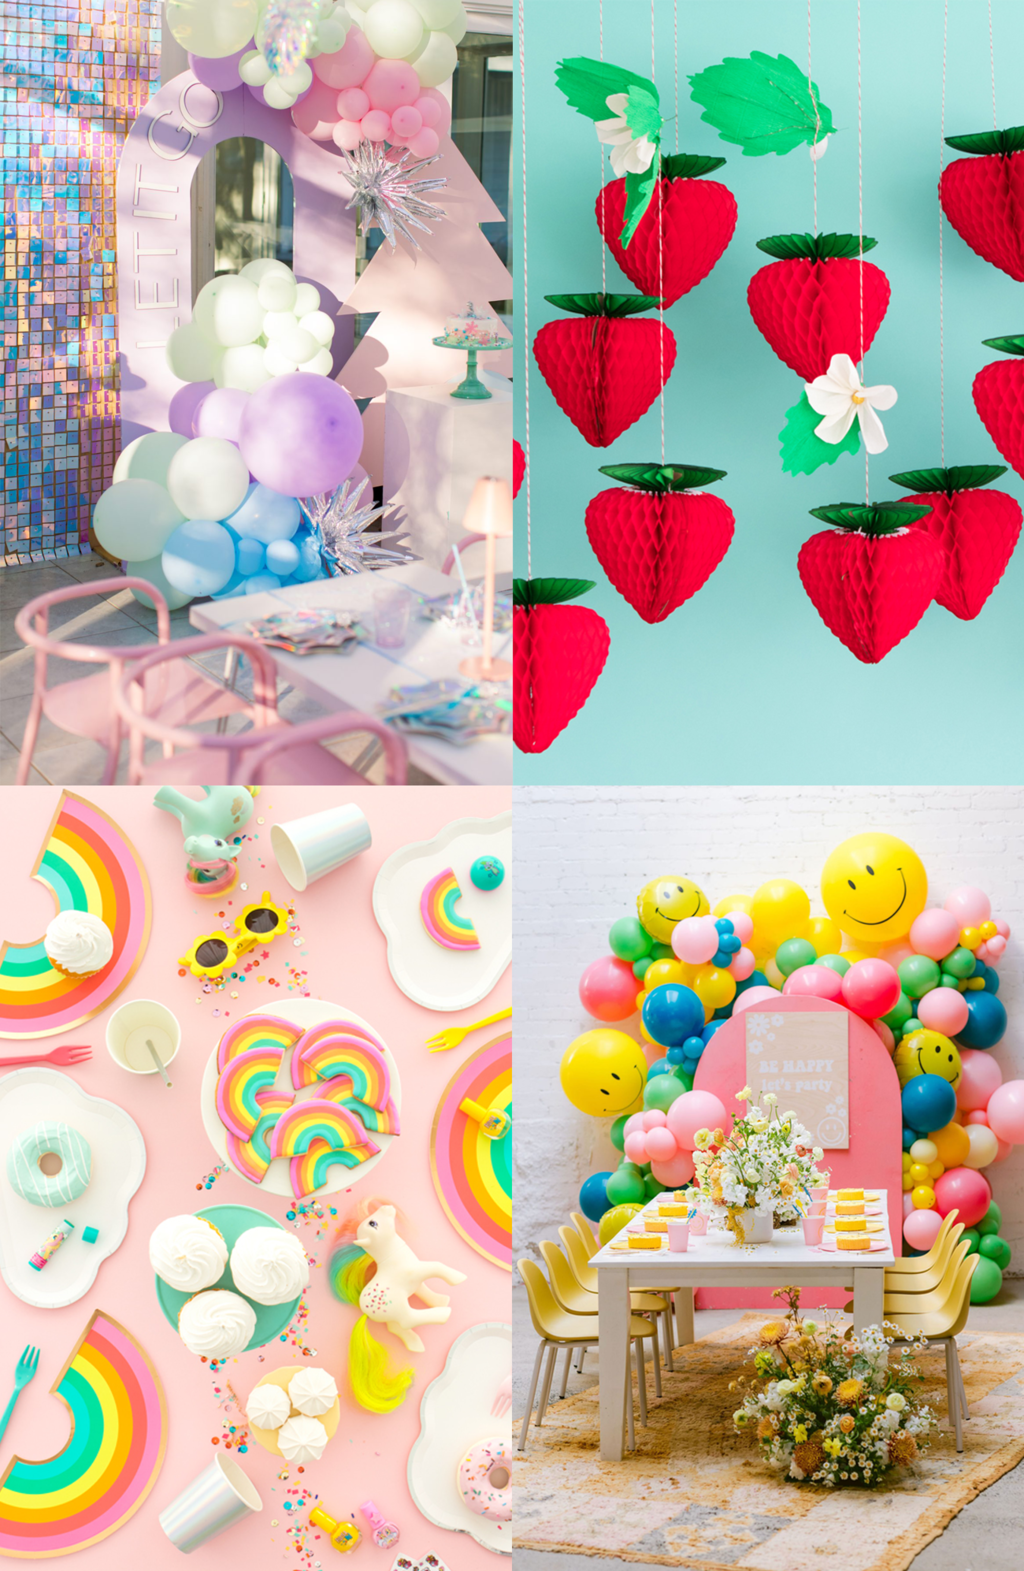 Super Chic Chanel Inspired Birthday Party - Birthday Party Ideas